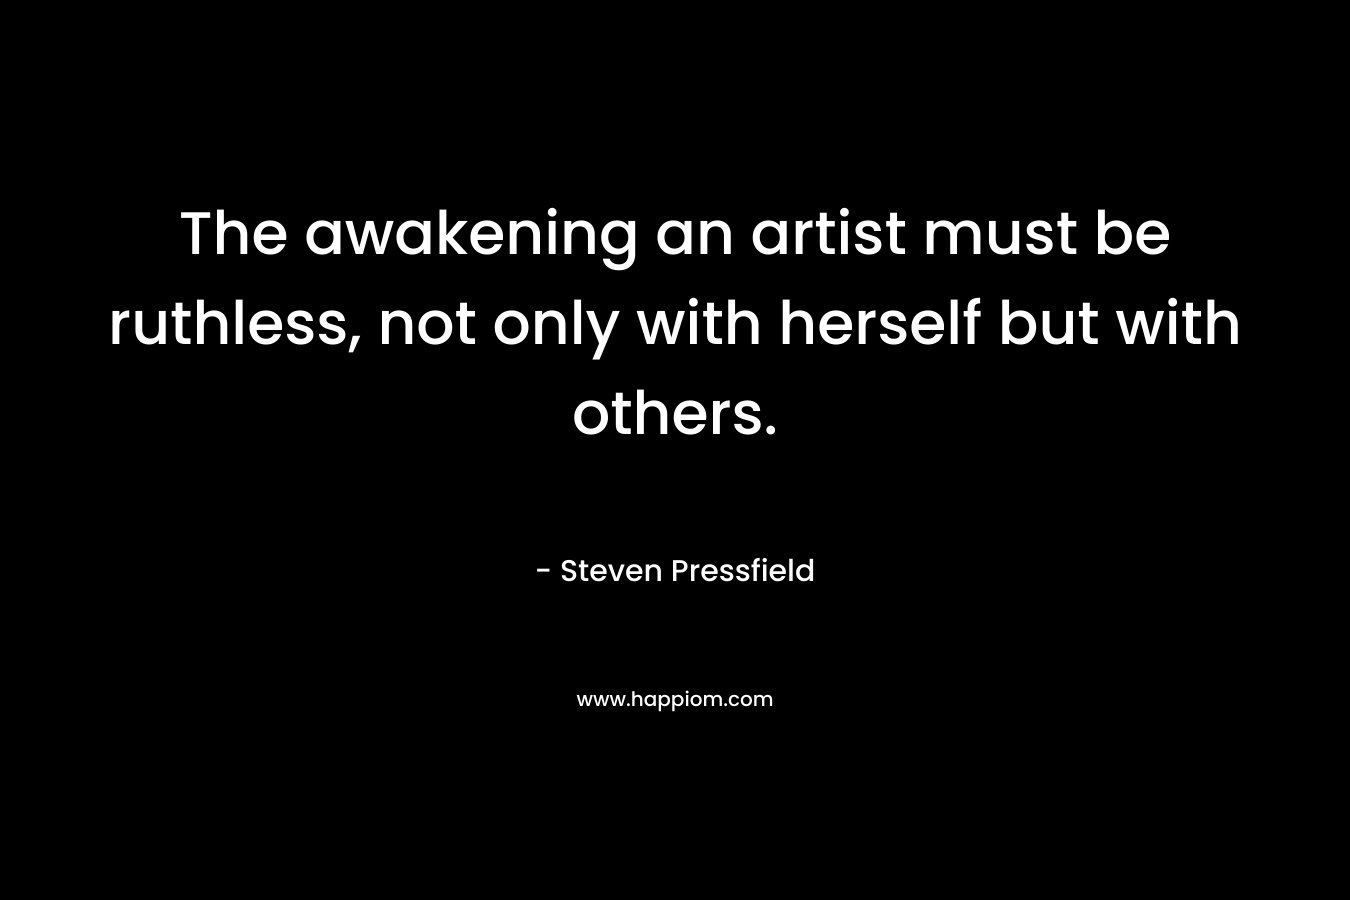 The awakening an artist must be ruthless, not only with herself but with others. – Steven Pressfield